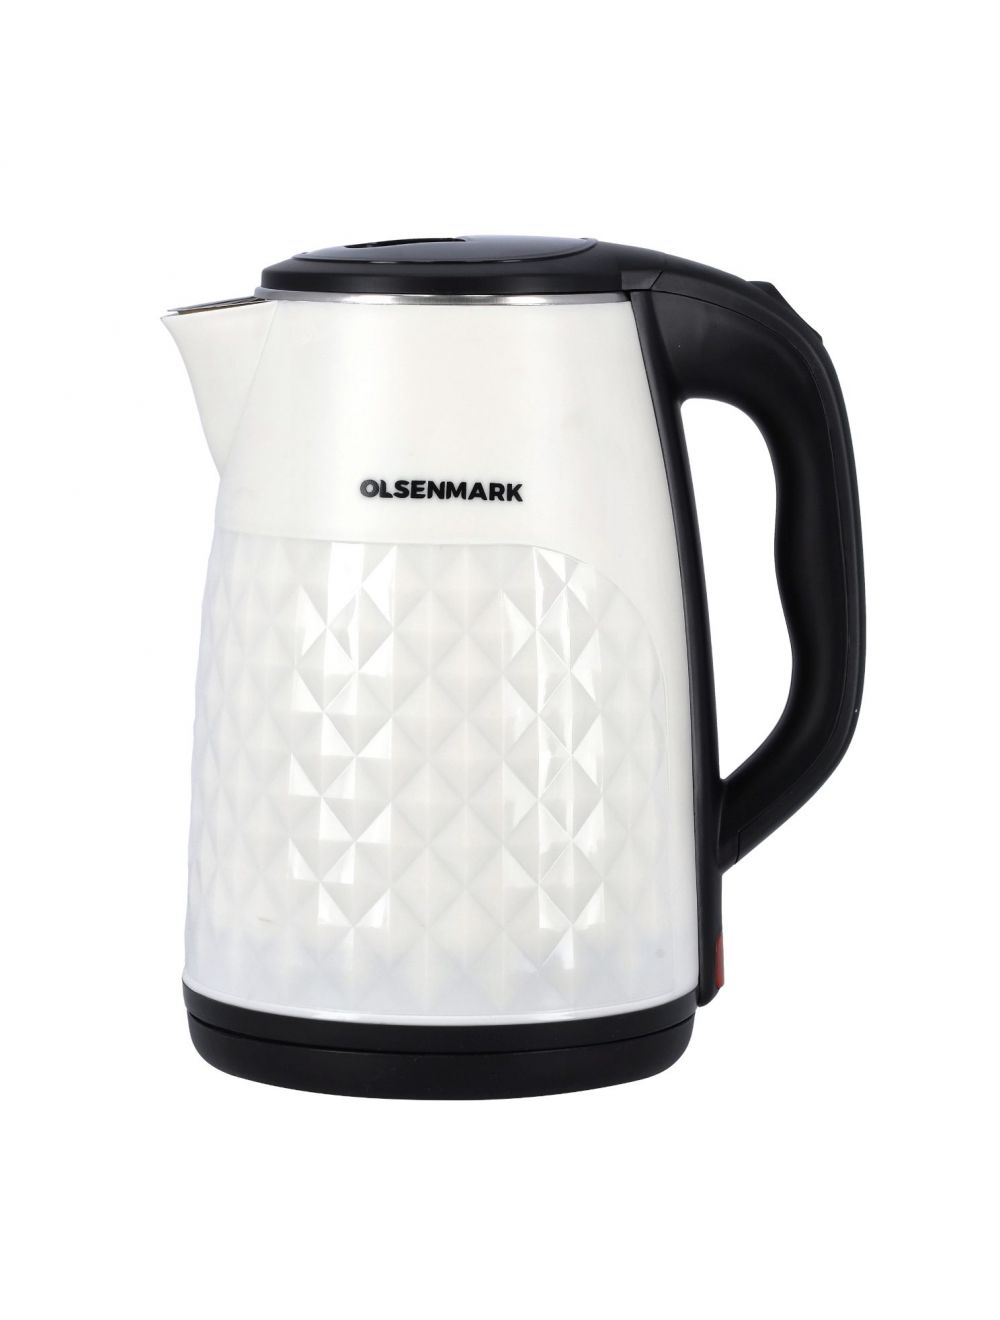 Olsenmark Electric Double Layer Kettle, 2.5L - Stainless Steel Interior Body - Cool Touch Plastic Outer Body